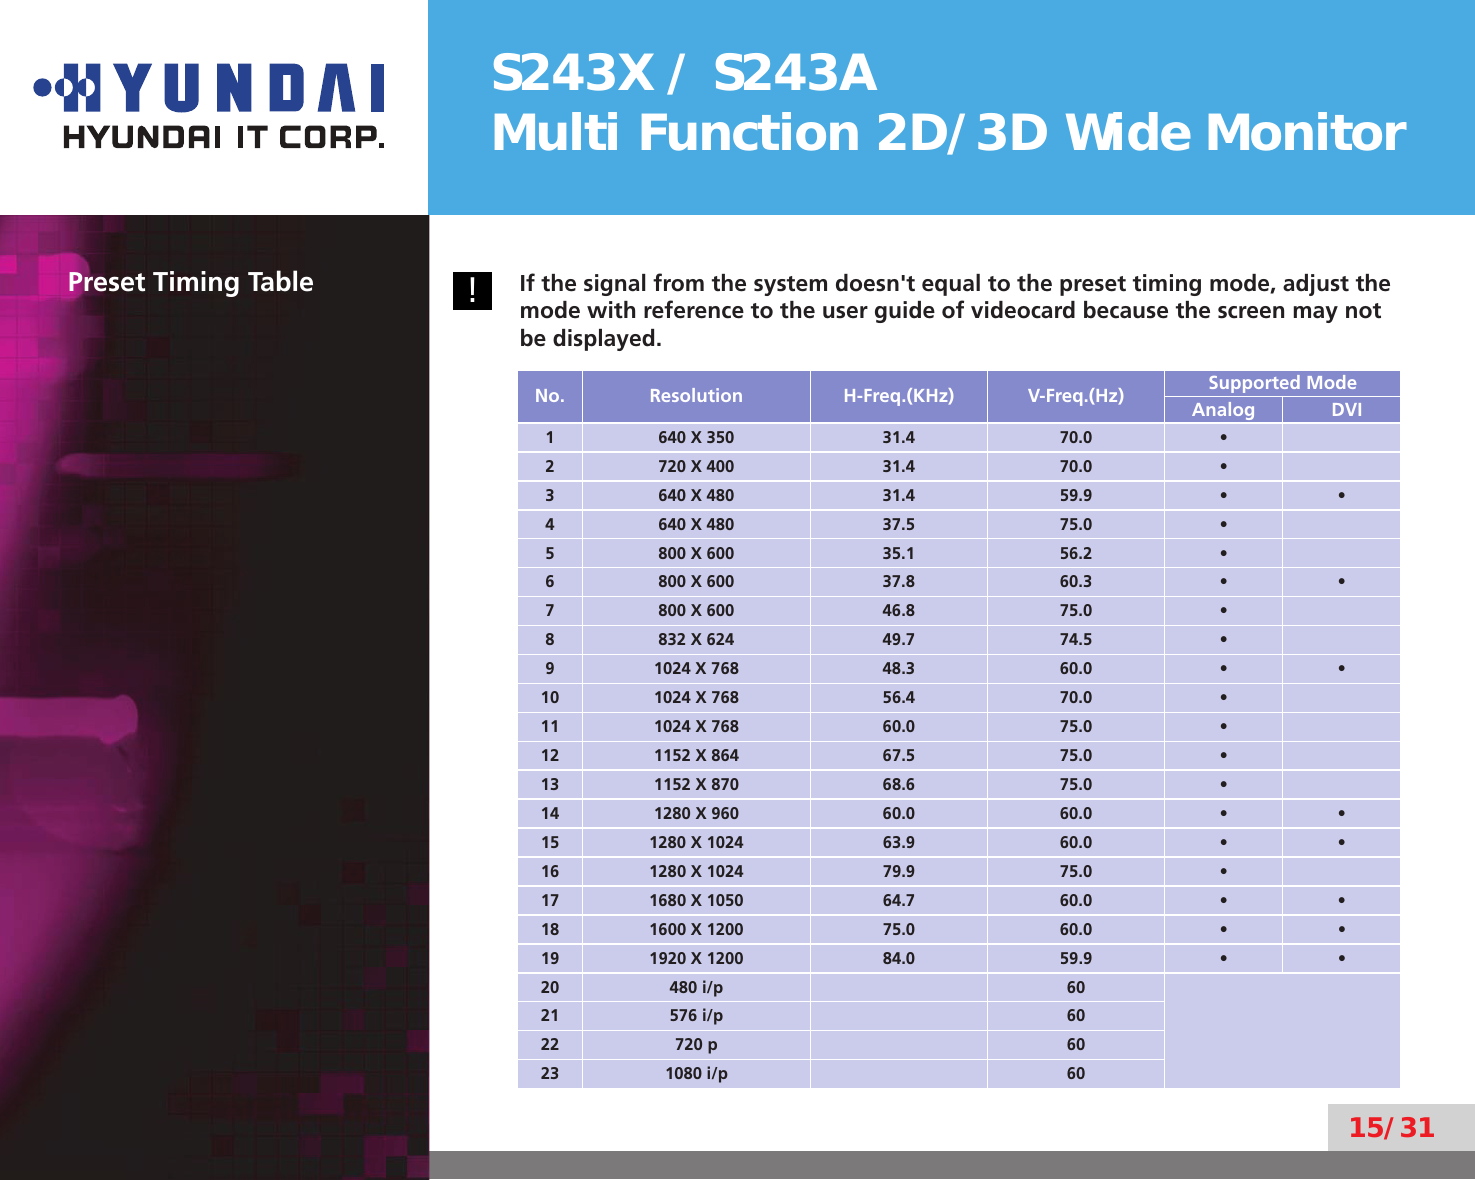 S243X / S243AMulti Function 2D/3D Wide Monitor15/31Preset Timing Table!If the signal from the system doesn&apos;t equal to the preset timing mode, adjust the mode with reference to the user guide of videocard because the screen may not be displayed.No. Resolution H-Freq.(KHz) V-Freq.(Hz) Supported ModeAnalog   DVI1 640 X 350 31.4 70.0 •2 720 X 400 31.4 70.0 •3 640 X 480 31.4 59.9 • •4 640 X 480 37.5 75.0 •5 800 X 600 35.1 56.2 •6 800 X 600 37.8 60.3 • •7 800 X 600 46.8 75.0 •8 832 X 624 49.7 74.5 •9 1024 X 768 48.3 60.0 • •10 1024 X 768 56.4 70.0 •11 1024 X 768 60.0 75.0 •12 1152 X 864 67.5 75.0 •13 1152 X 870 68.6 75.0 •14 1280 X 960 60.0 60.0 • •15 1280 X 1024 63.9 60.0 • •16 1280 X 1024 79.9 75.0 •17 1680 X 1050 64.7 60.0 • •18 1600 X 1200 75.0 60.0 • •19 1920 X 1200 84.0 59.9 • •20 480 i/p 60비비비 비비21 576 i/p 6022 720 p 6023 1080 i/p 60